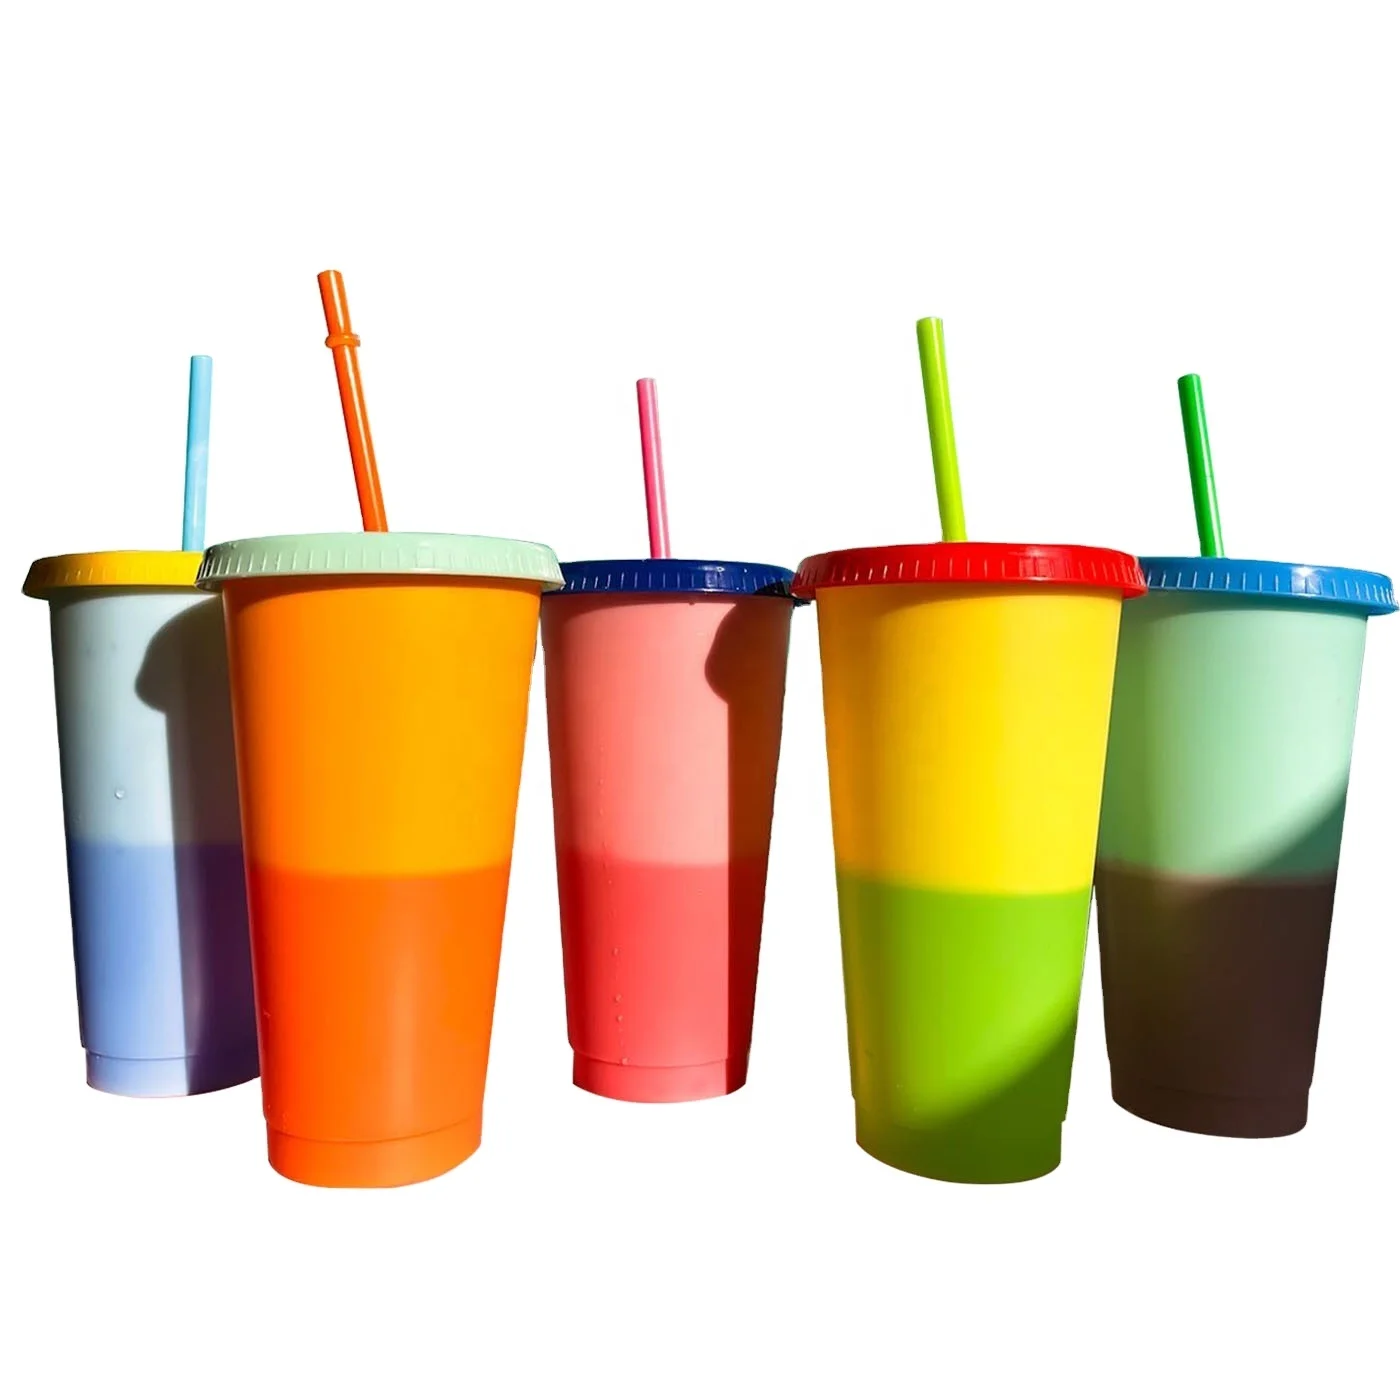 

24oz 700ml whosale resuable tumblers mana cold color changing cups with lids and straws, Pastel/ translucent